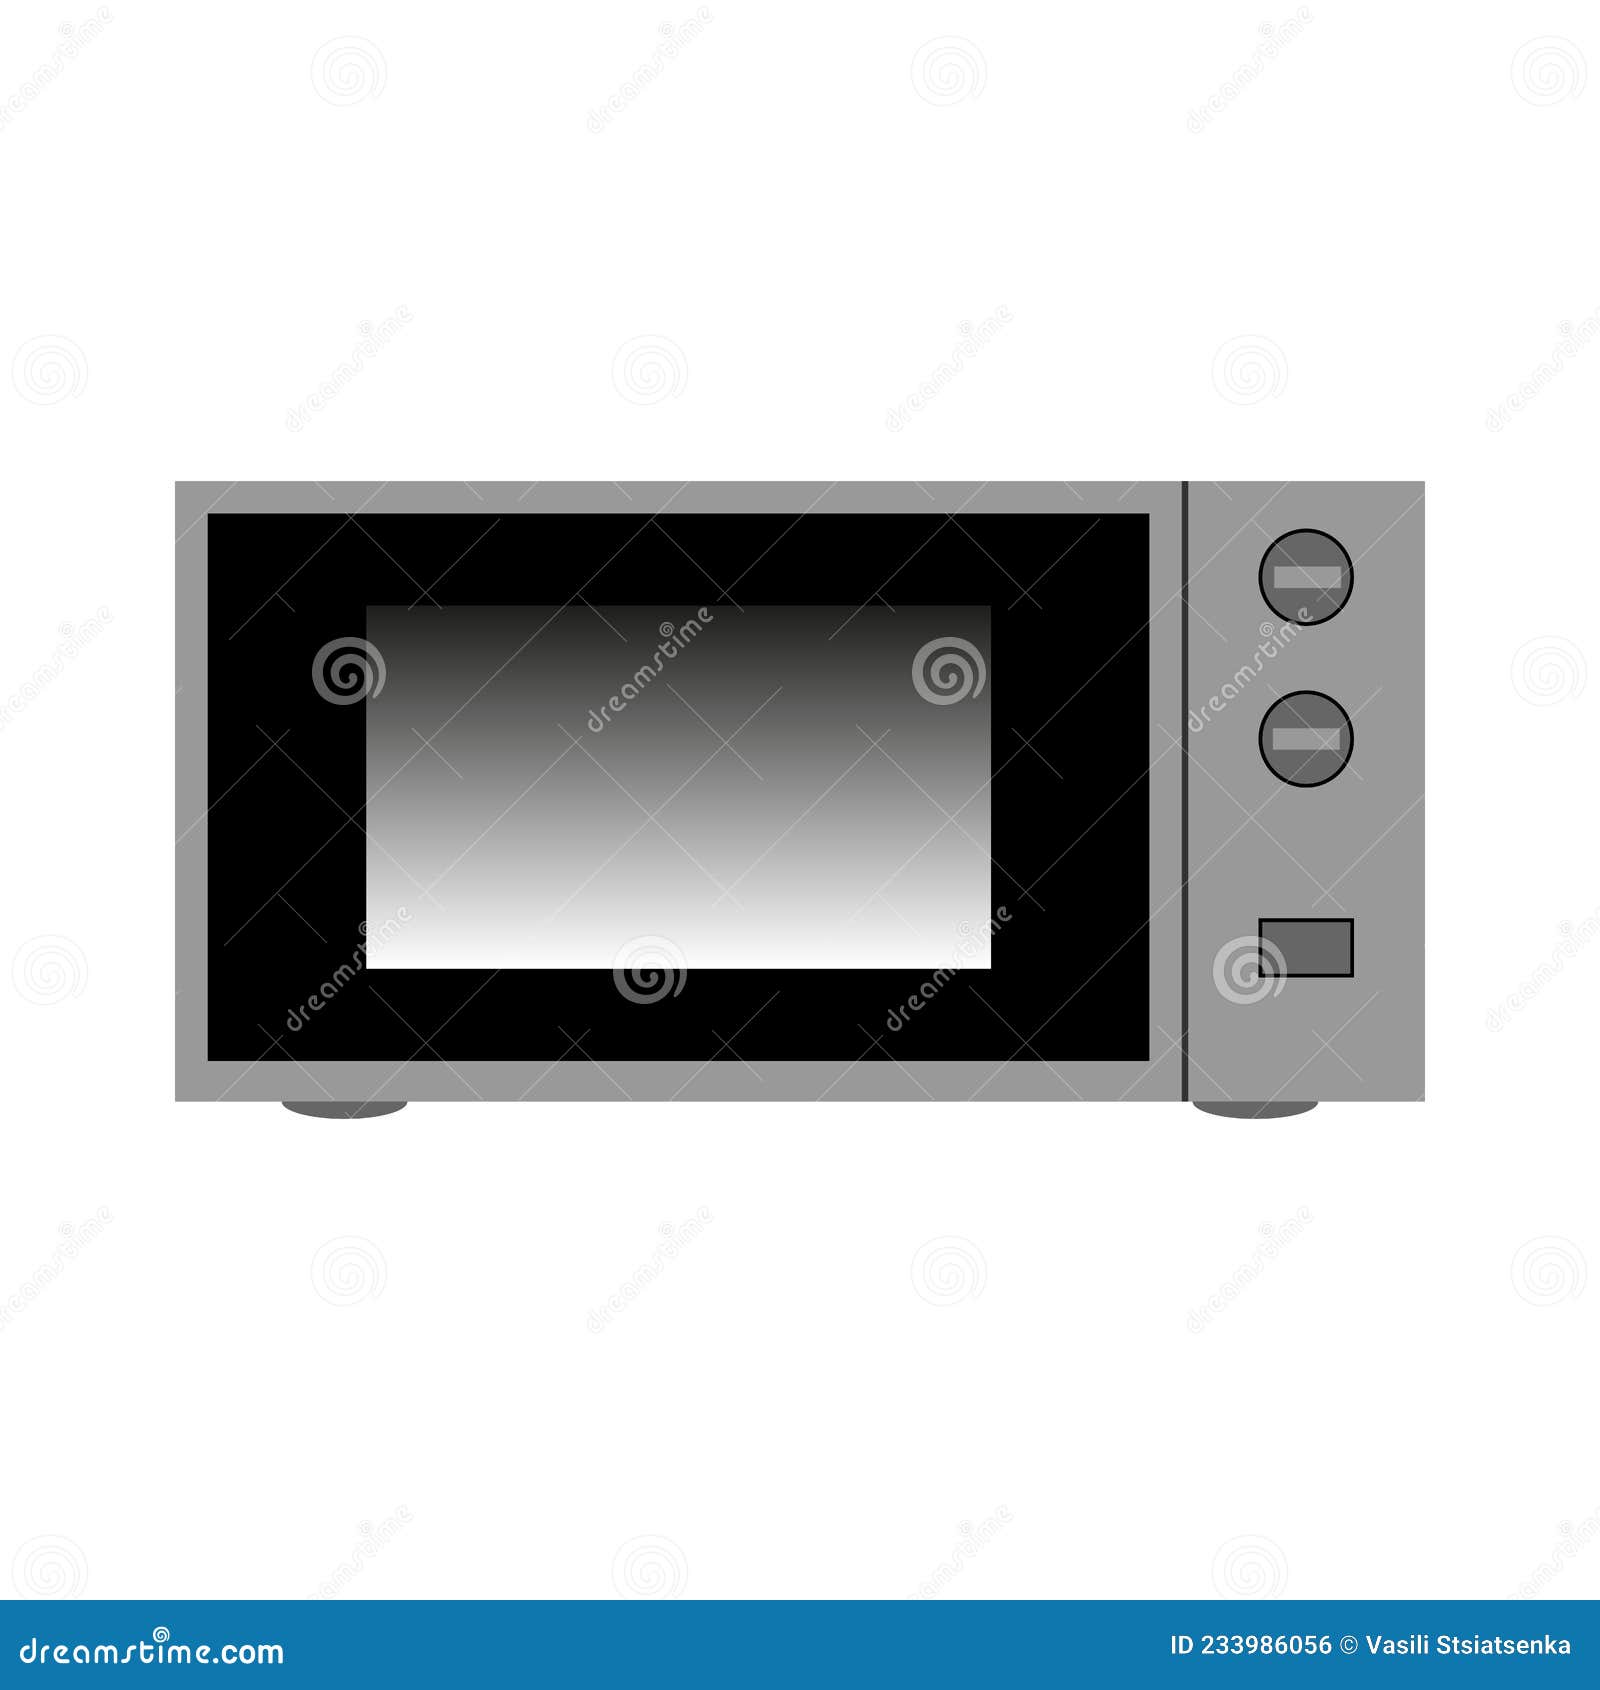 https://thumbs.dreamstime.com/z/abstract-microwave-oven-icon-grey-isolated-white-background-simple-graphic-design-element-templates-web-site-vector-233986056.jpg